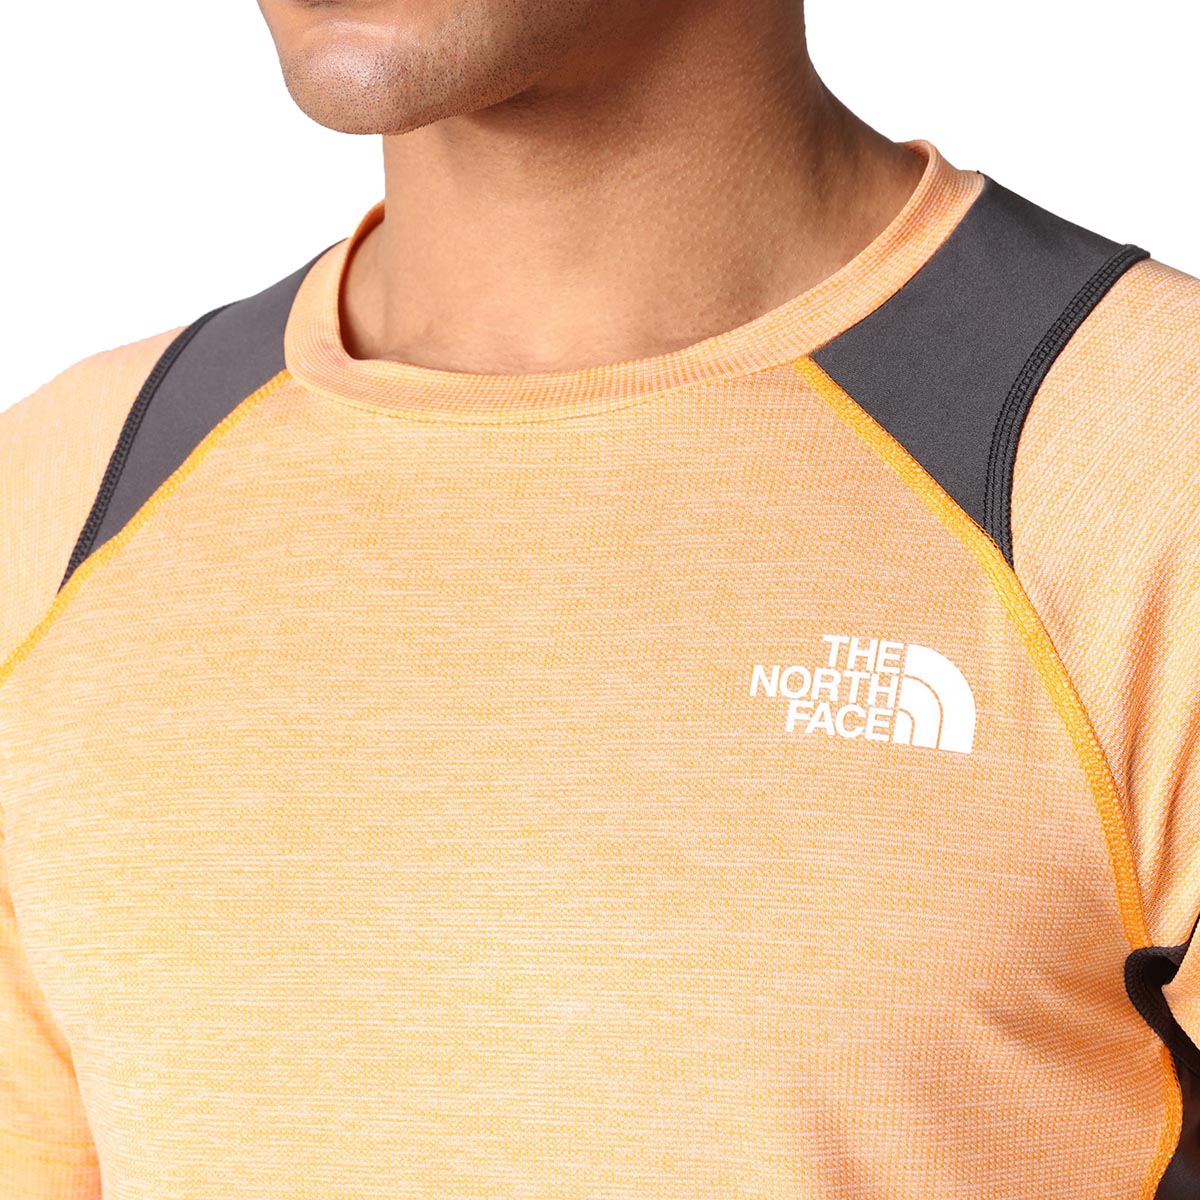 THE NORTH FACE - ATHLETIC OUTDOOR GLACIER T-SHIRT